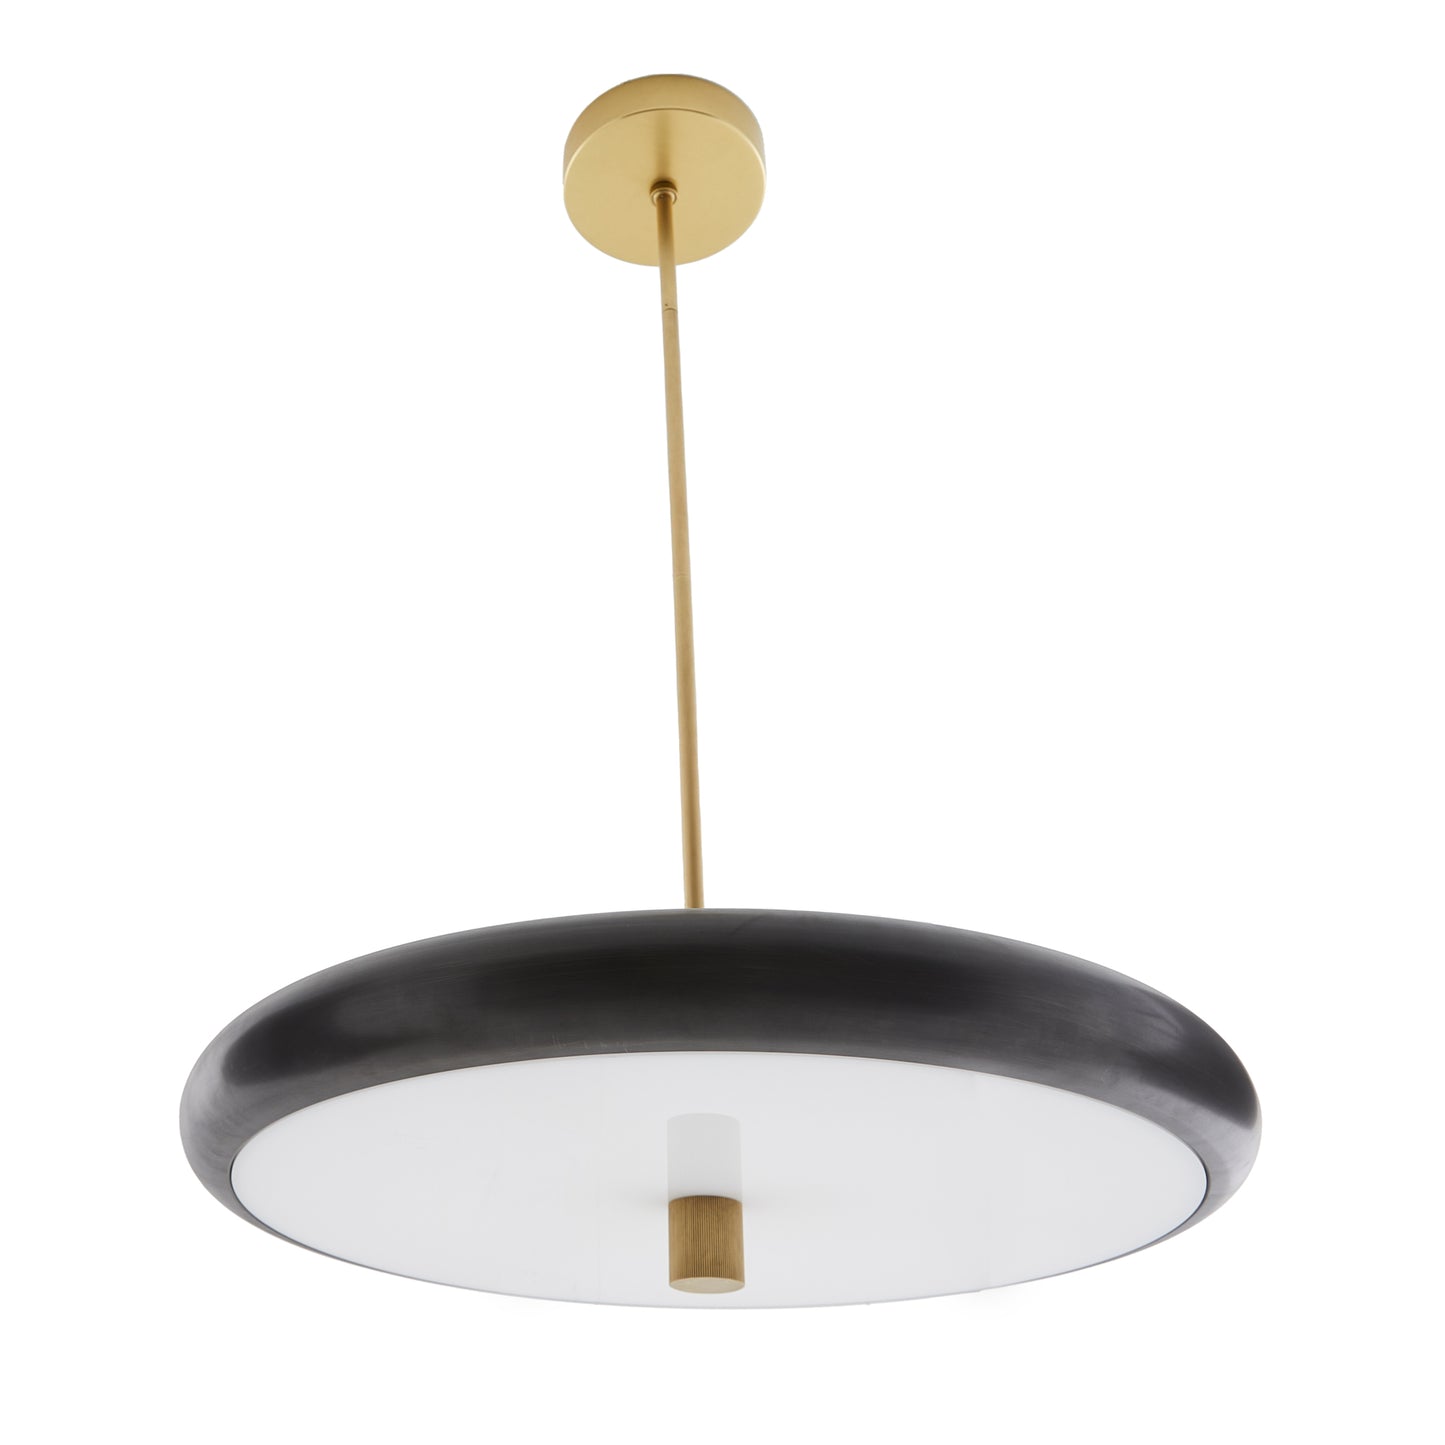 Plato Pendant - Saucer-Shaped English Bronze Iron with Frosted Acrylic Diffuser